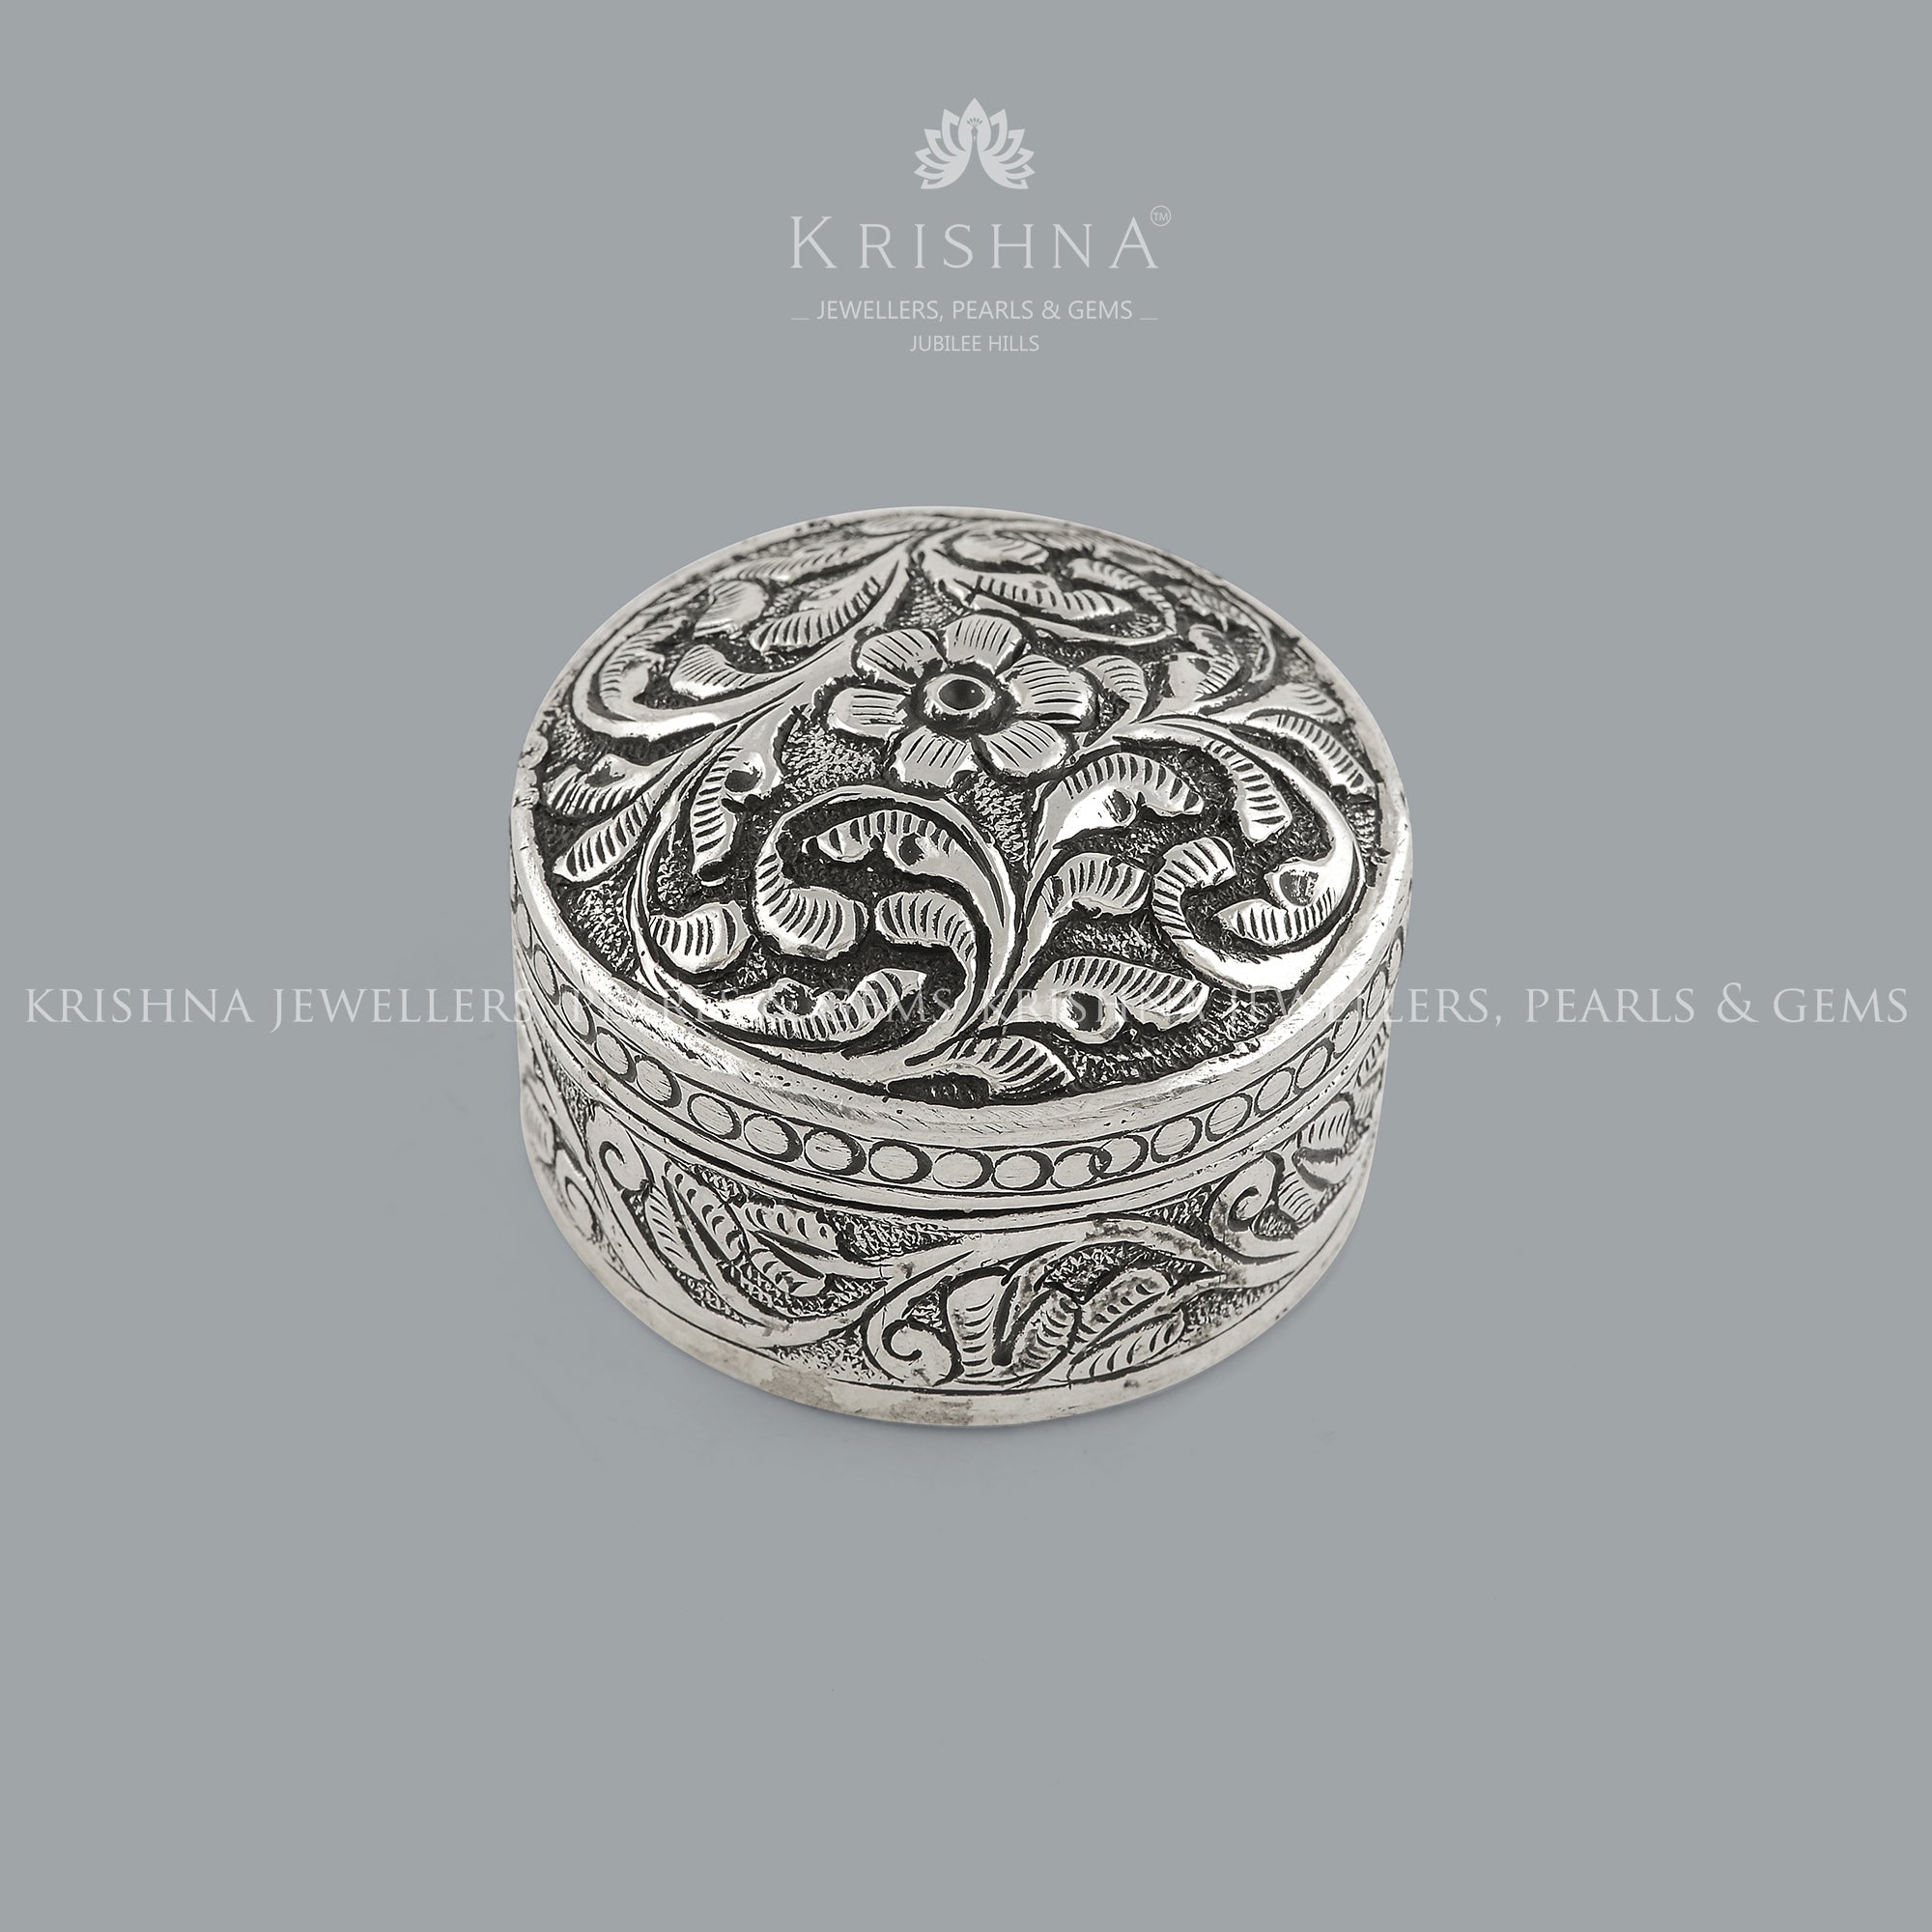 Antique Silver Box with Floral Designs